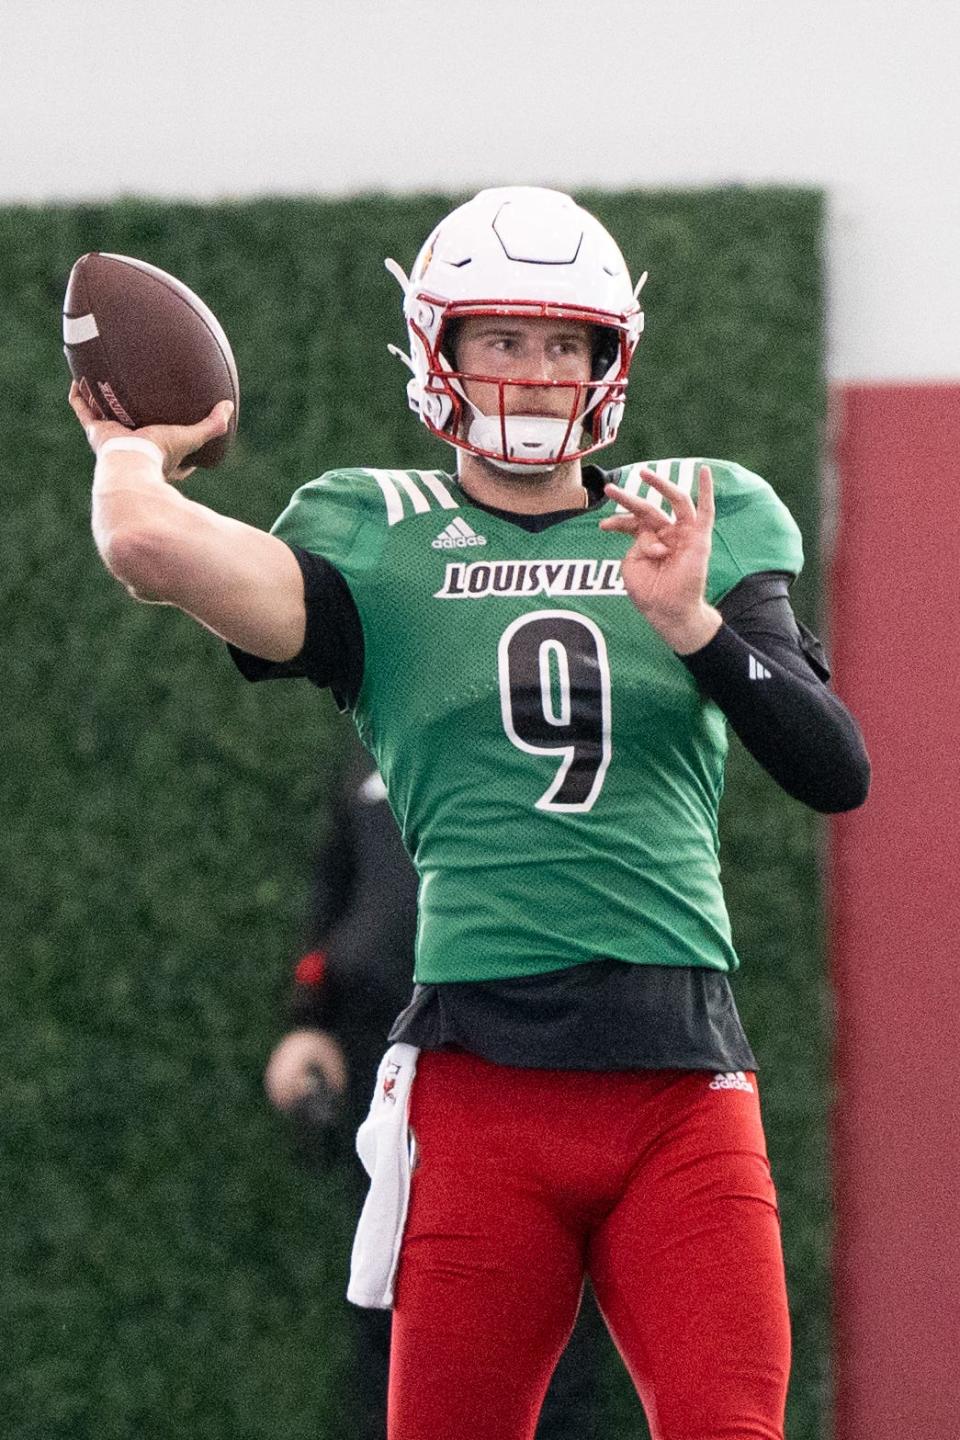 Louisville quarterback Tyler Shough has made adjustments based on the Cardinals' style of play.